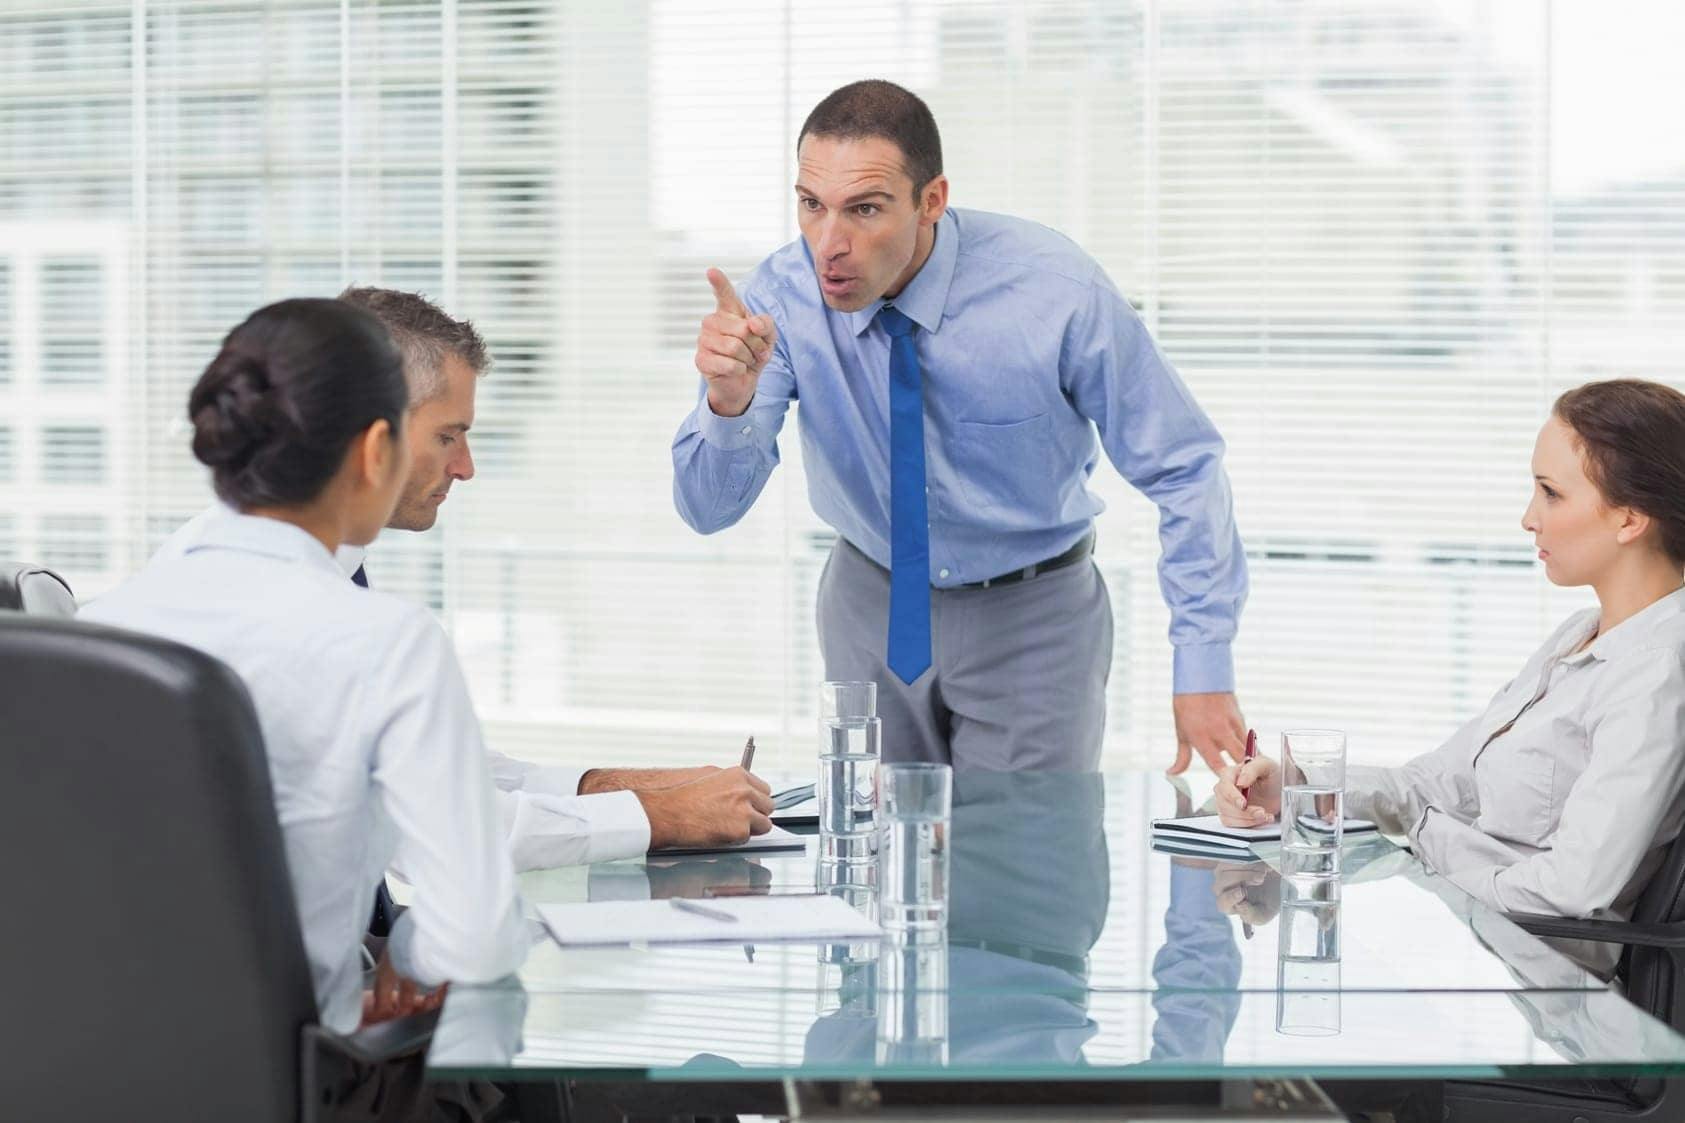 How to Prevent Retaliation in the Workplace